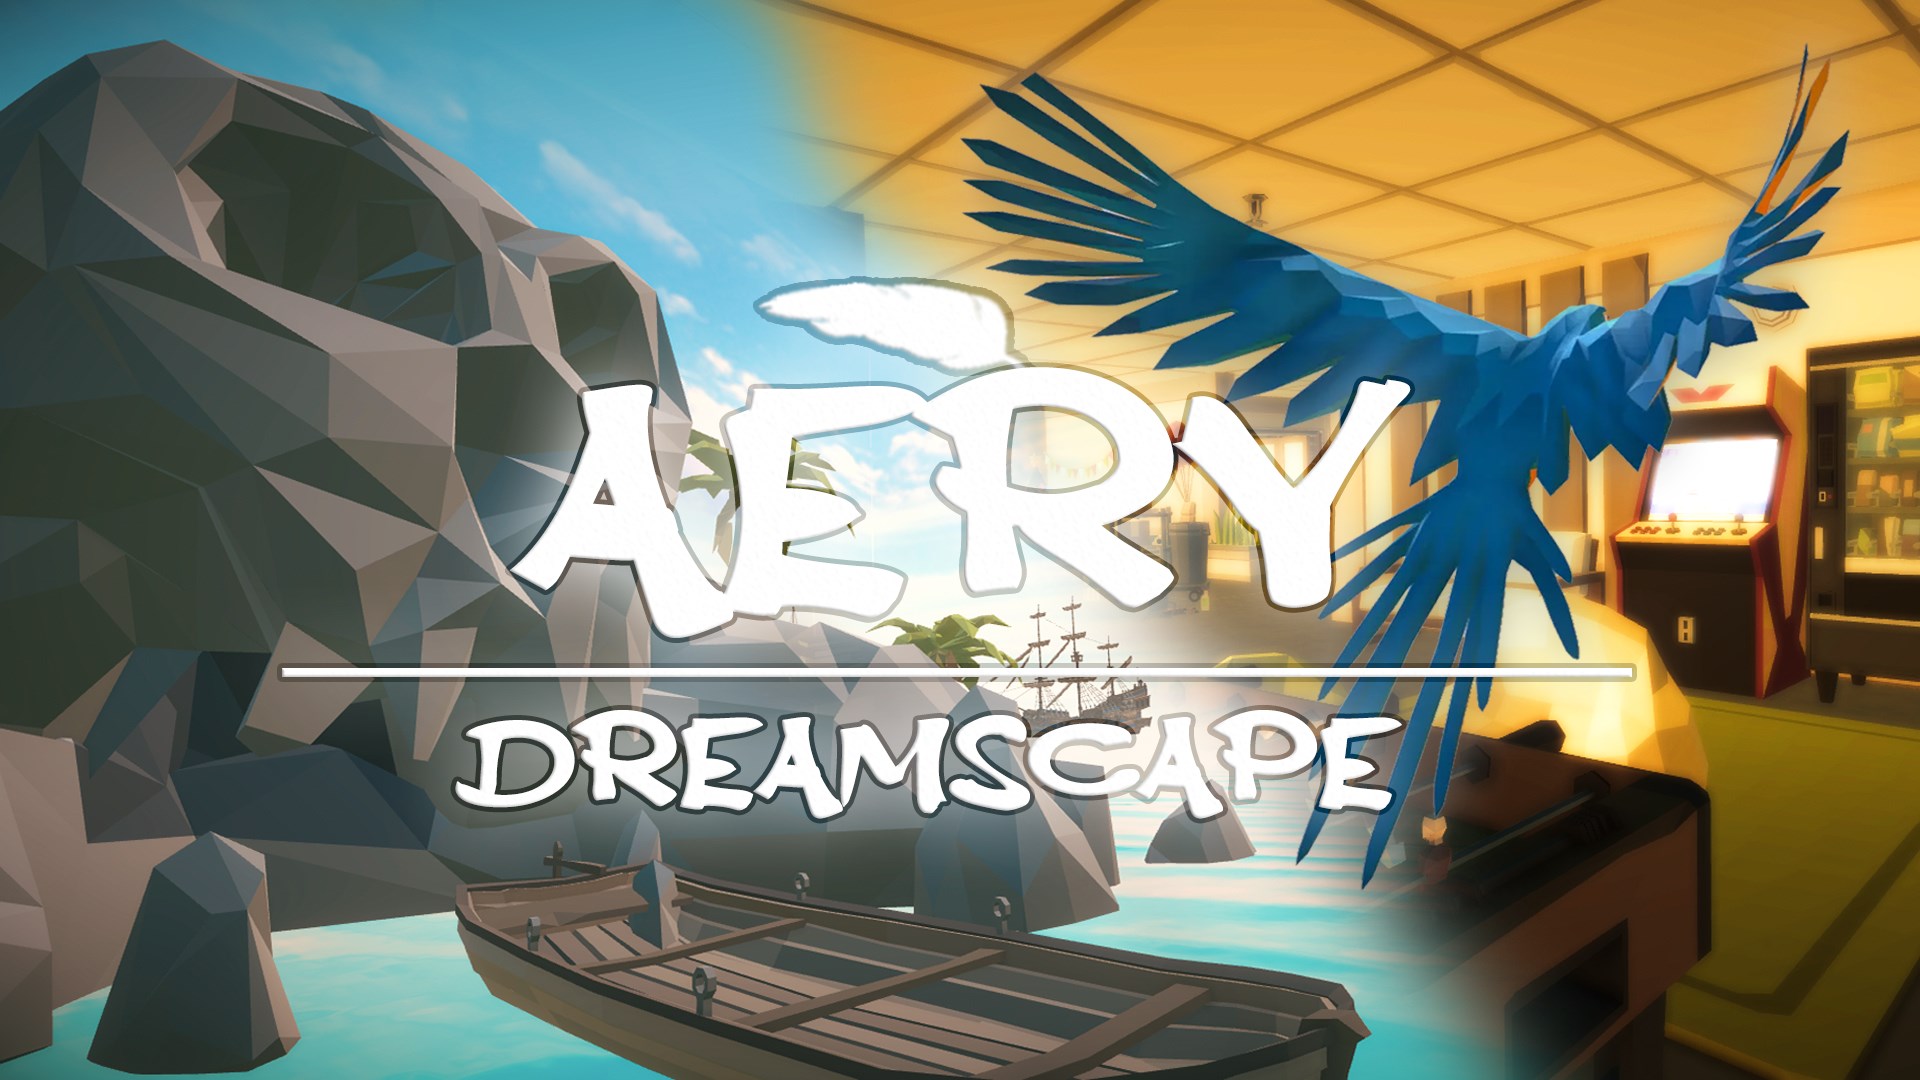 Aery – Dreamscape Is Now Available For Xbox One And Xbox Series X|S